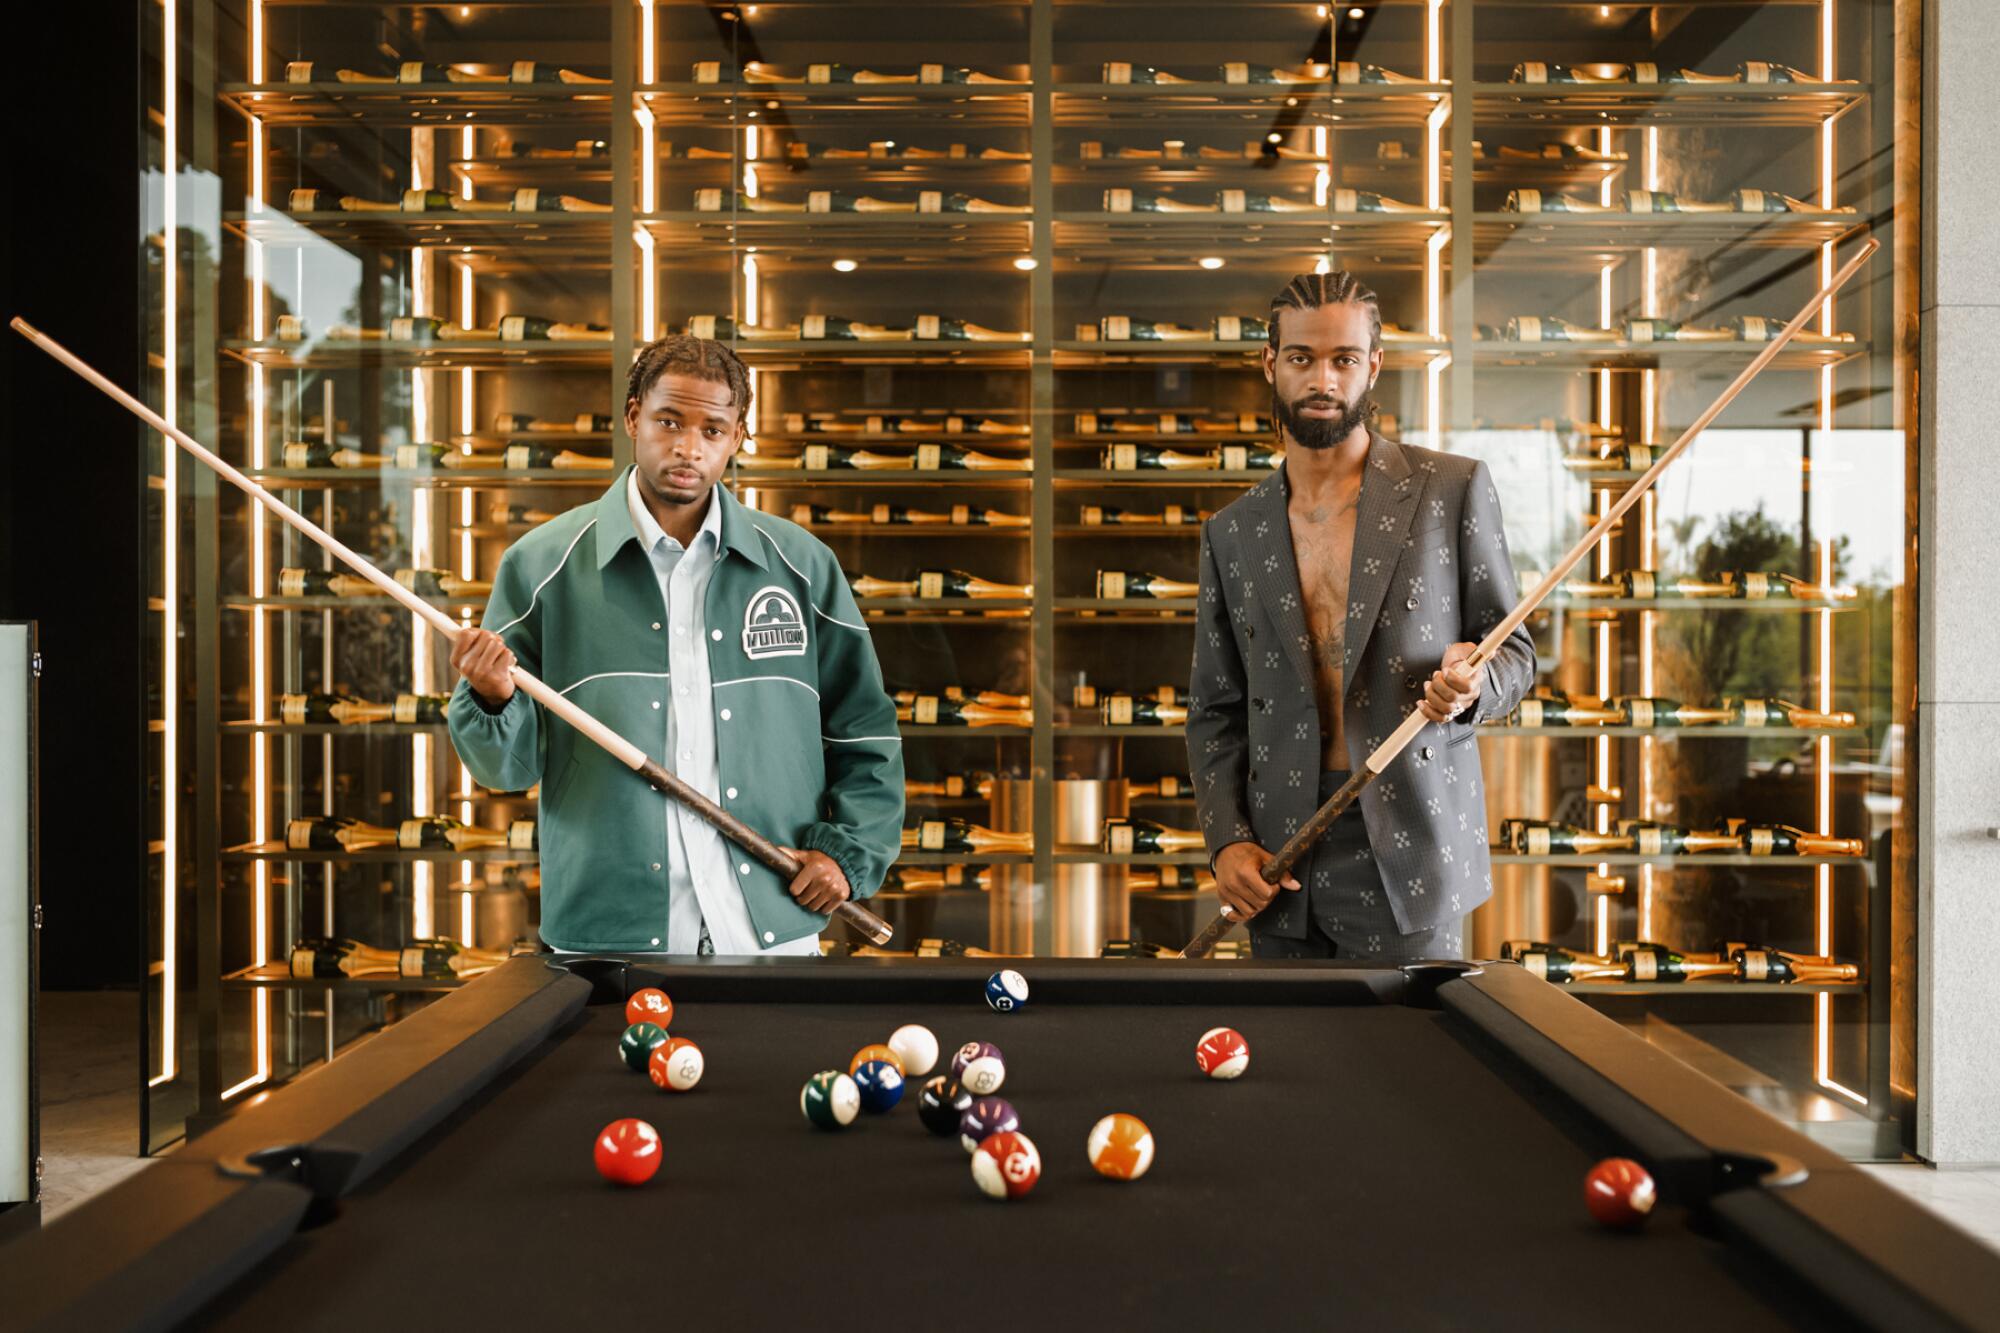 Two men stand wearing Louis Vuitton stand at the head of a pool table holding cues.